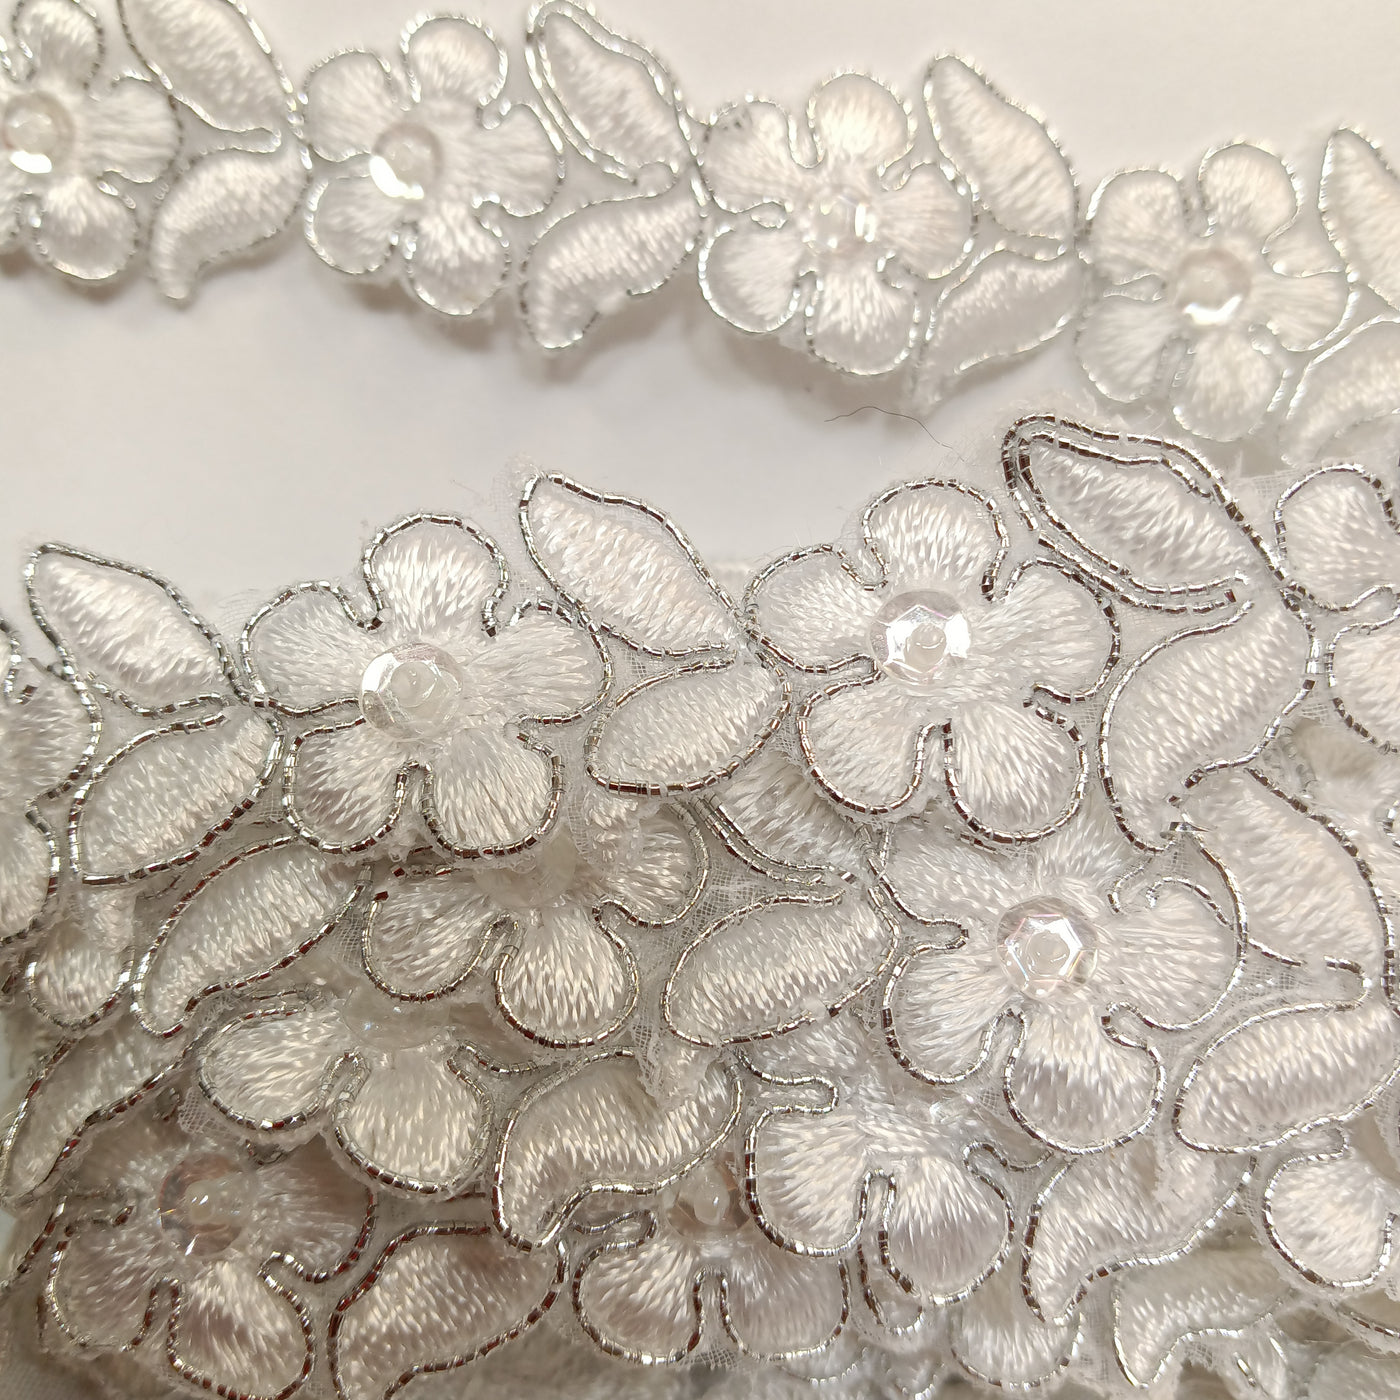 Corded, Beaded & Embroidered White with Silver Trimming. Lace Usa